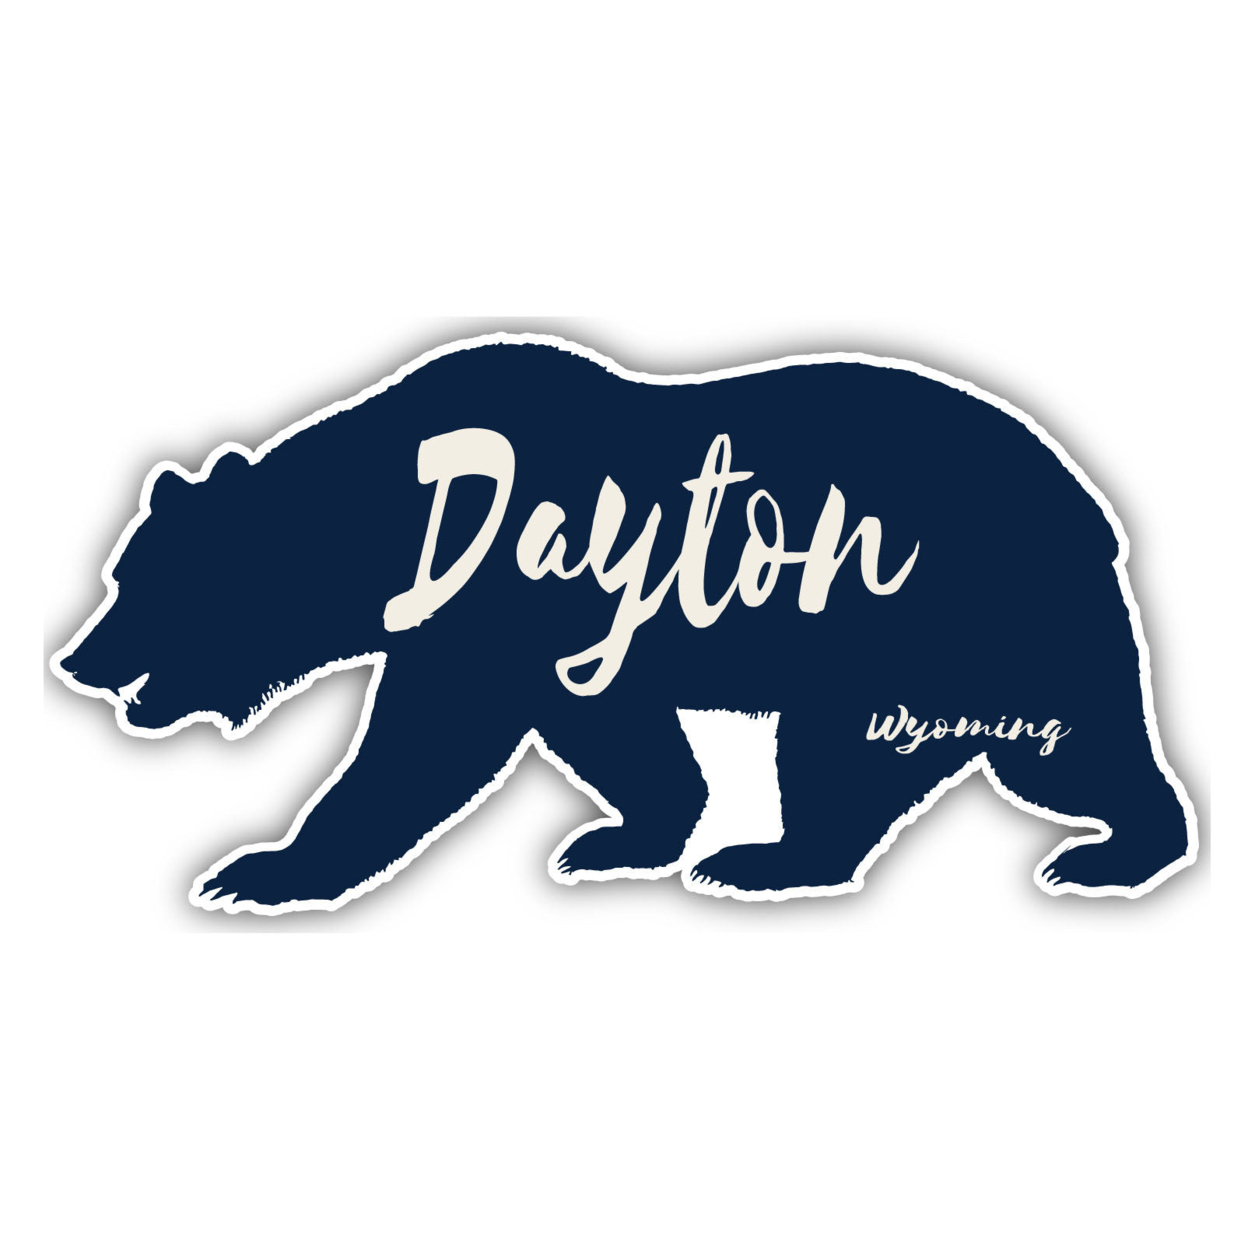 Dayton Wyoming Souvenir Decorative Stickers (Choose Theme And Size) - 4-Pack, 2-Inch, Bear